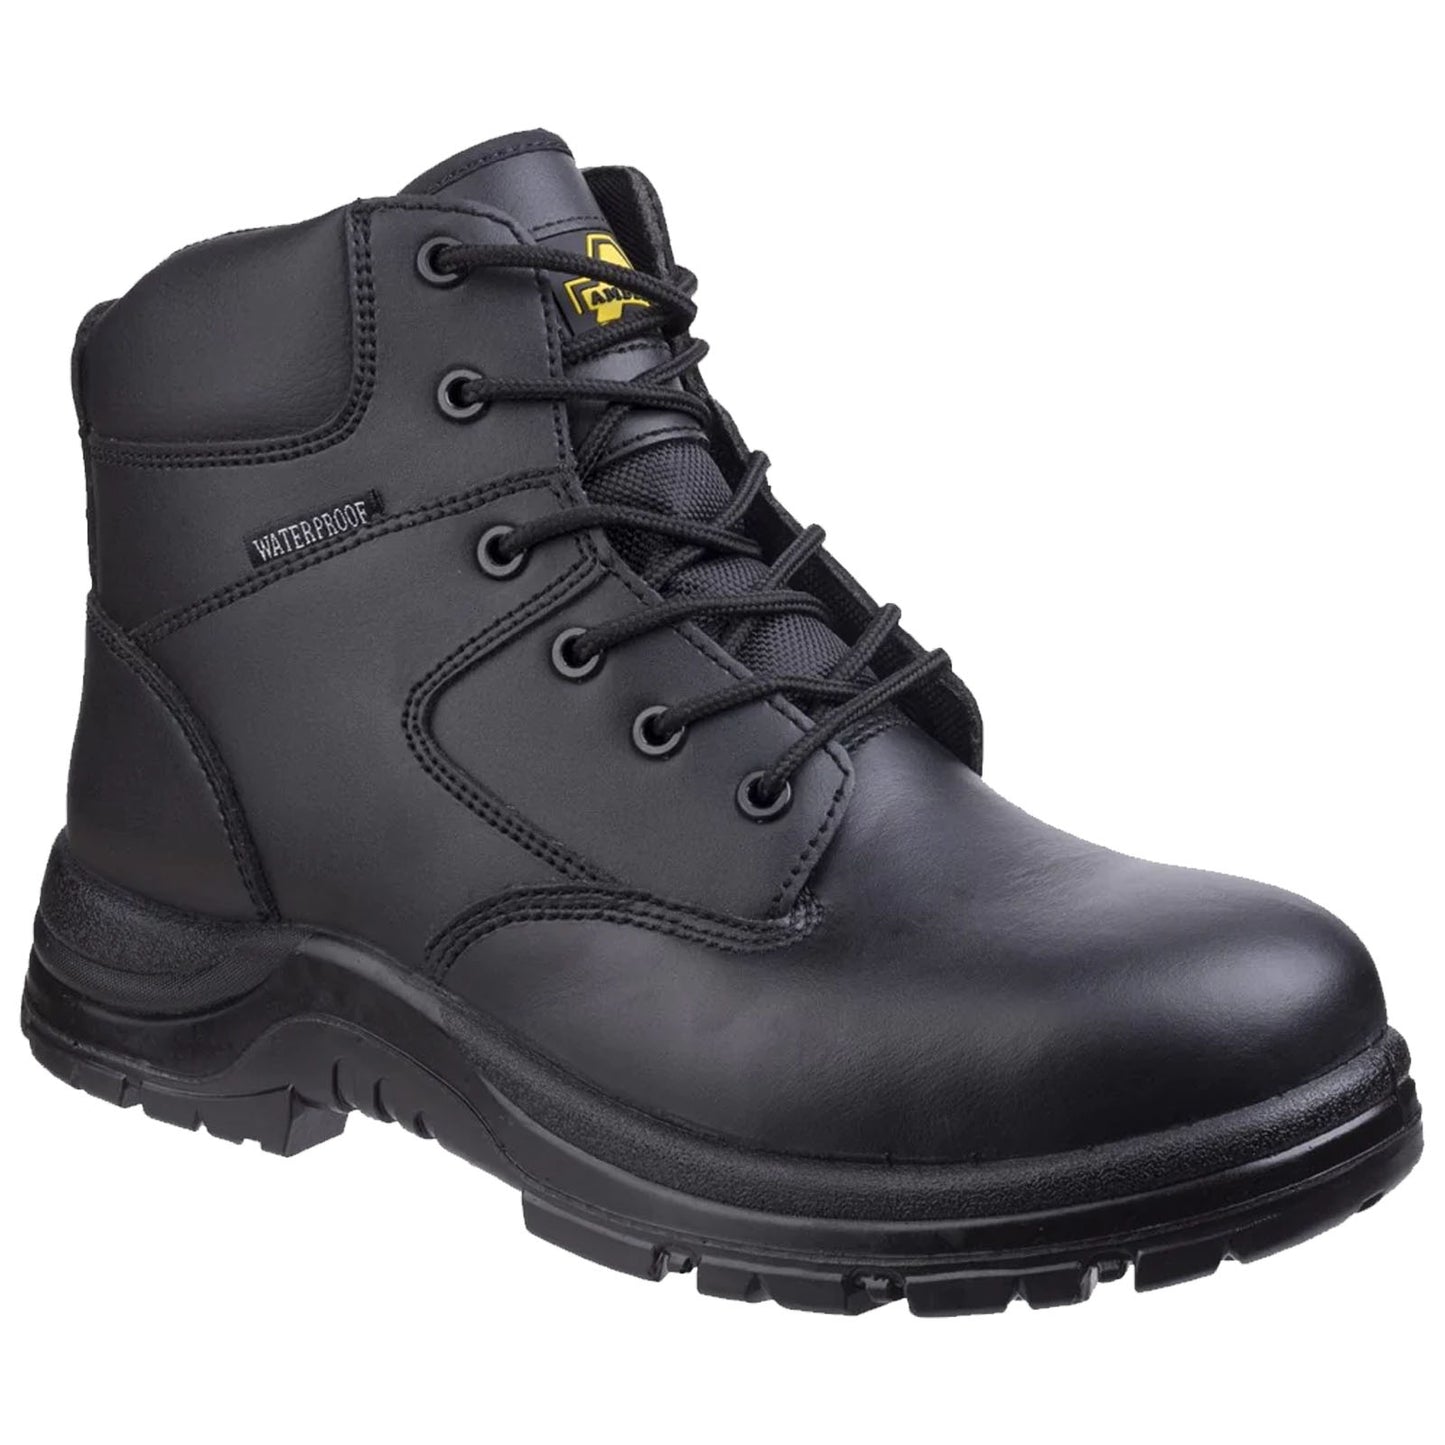 Amblers FS006C S3 Safety Boots